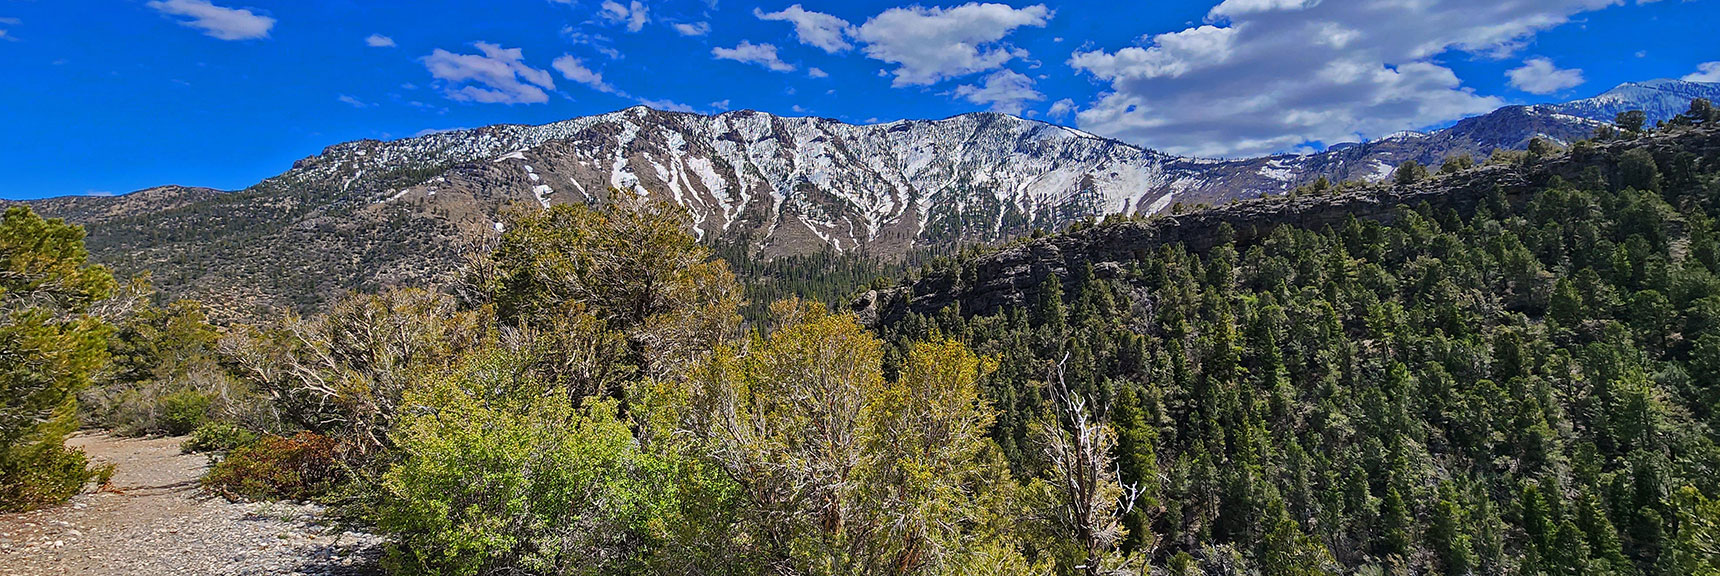 Harris Mountain Center, Griffith Peak Distant to Right | Eagles Nest Loop | Mt Charleston Wilderness | Spring Mountains, Nevada